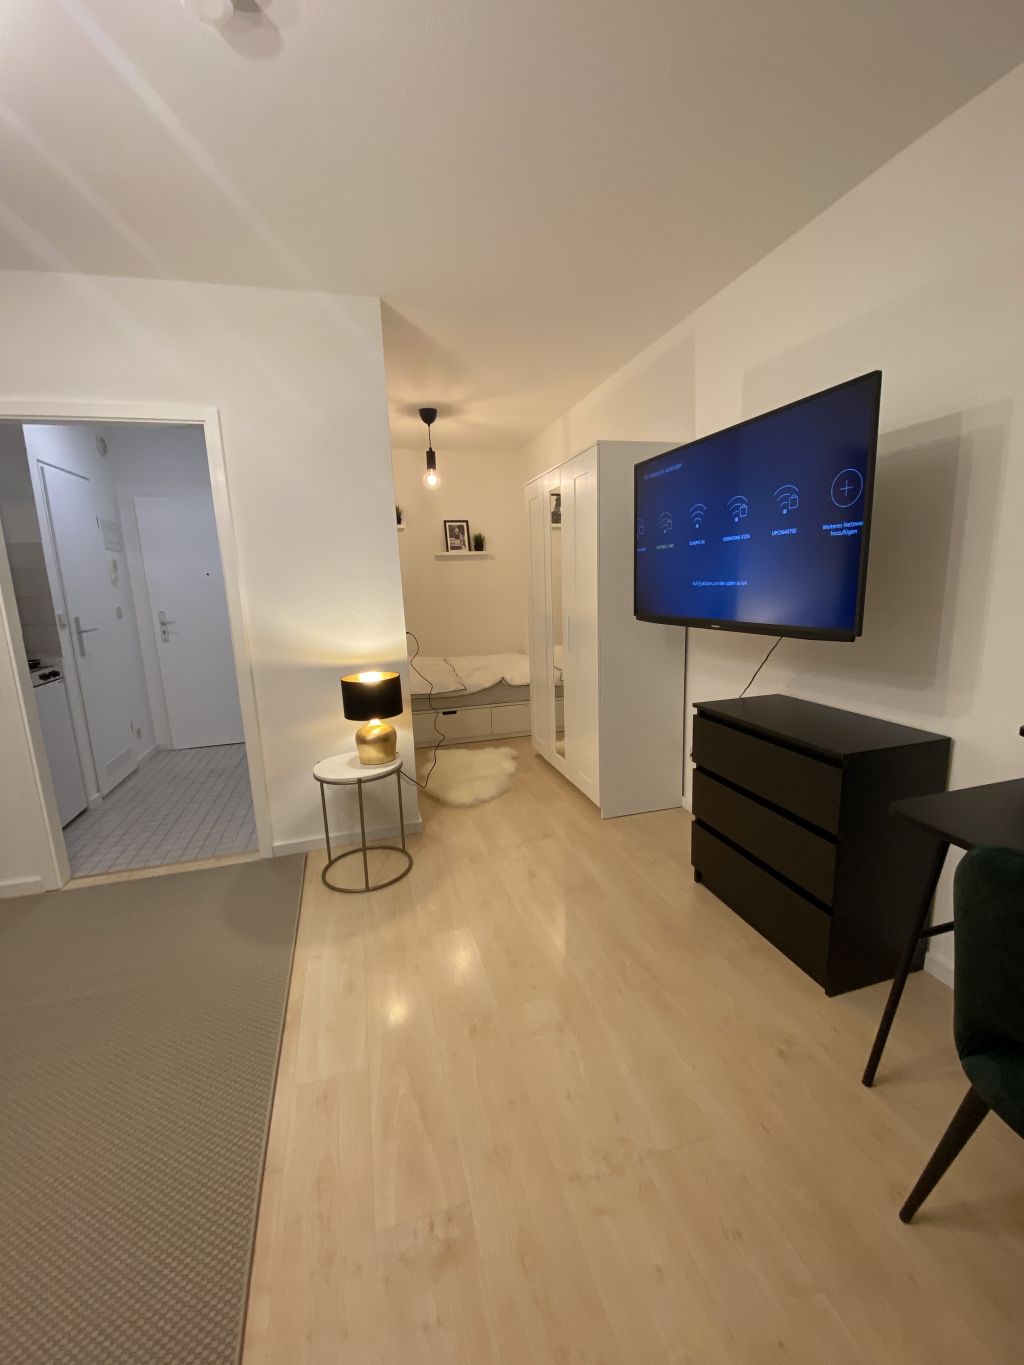 Fashionable apartment with terrace, underground parking space in a quiet neighborhood (Karlsruhe) Berlin